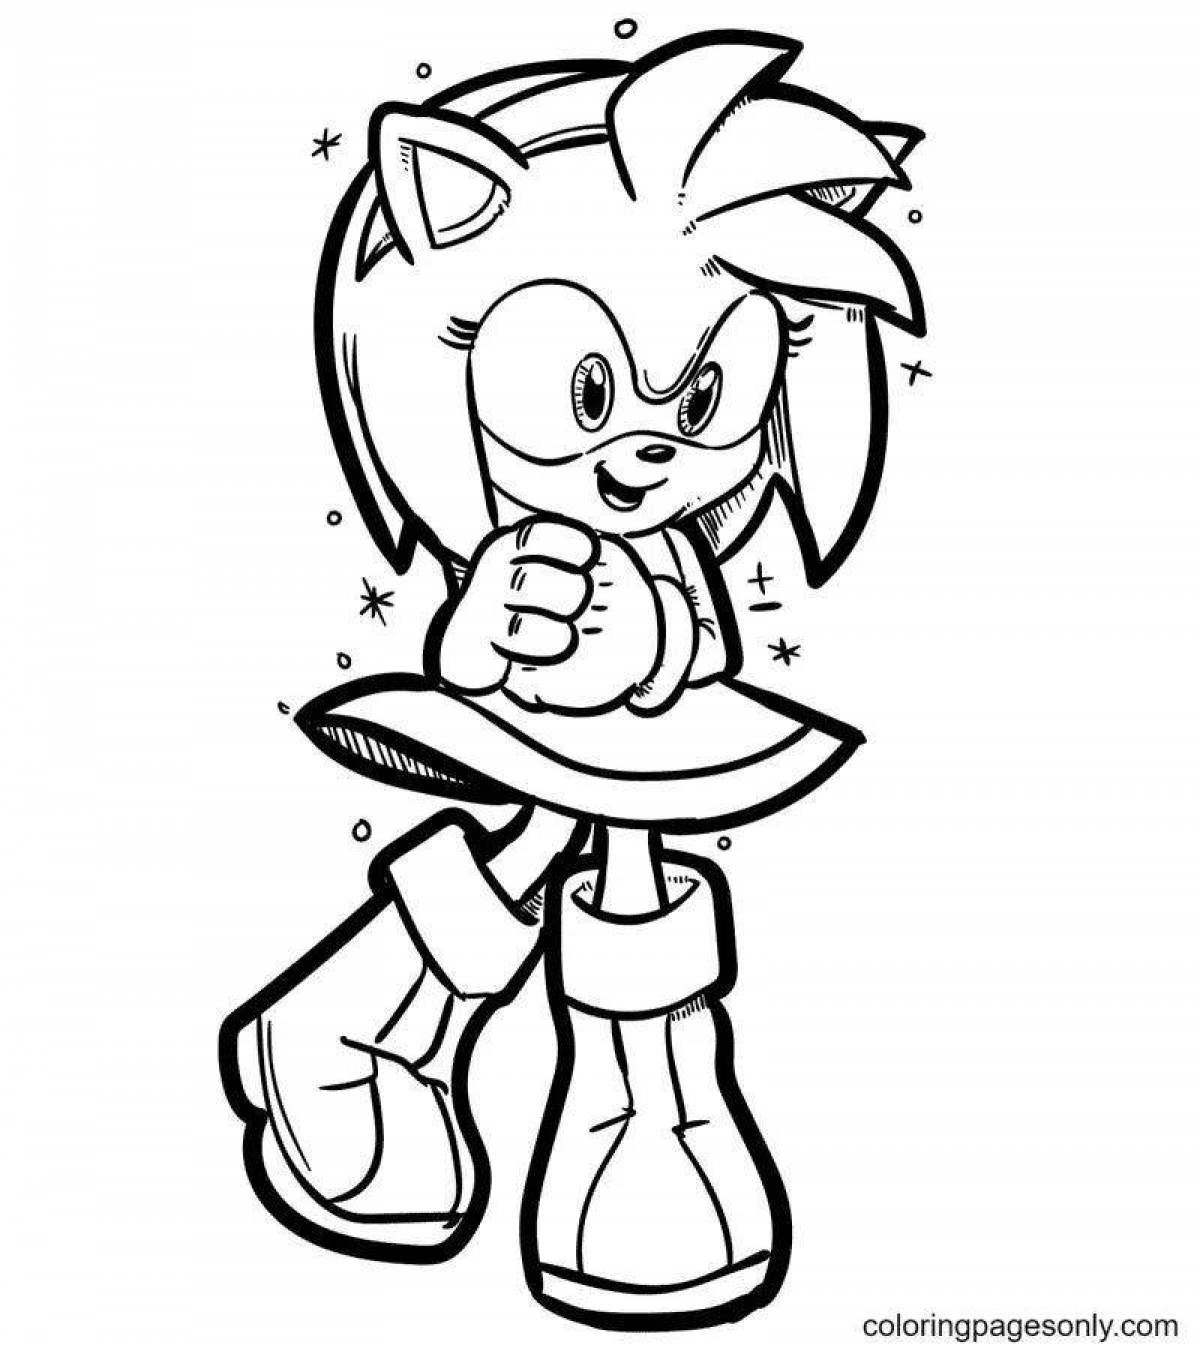 Coloring playful amy